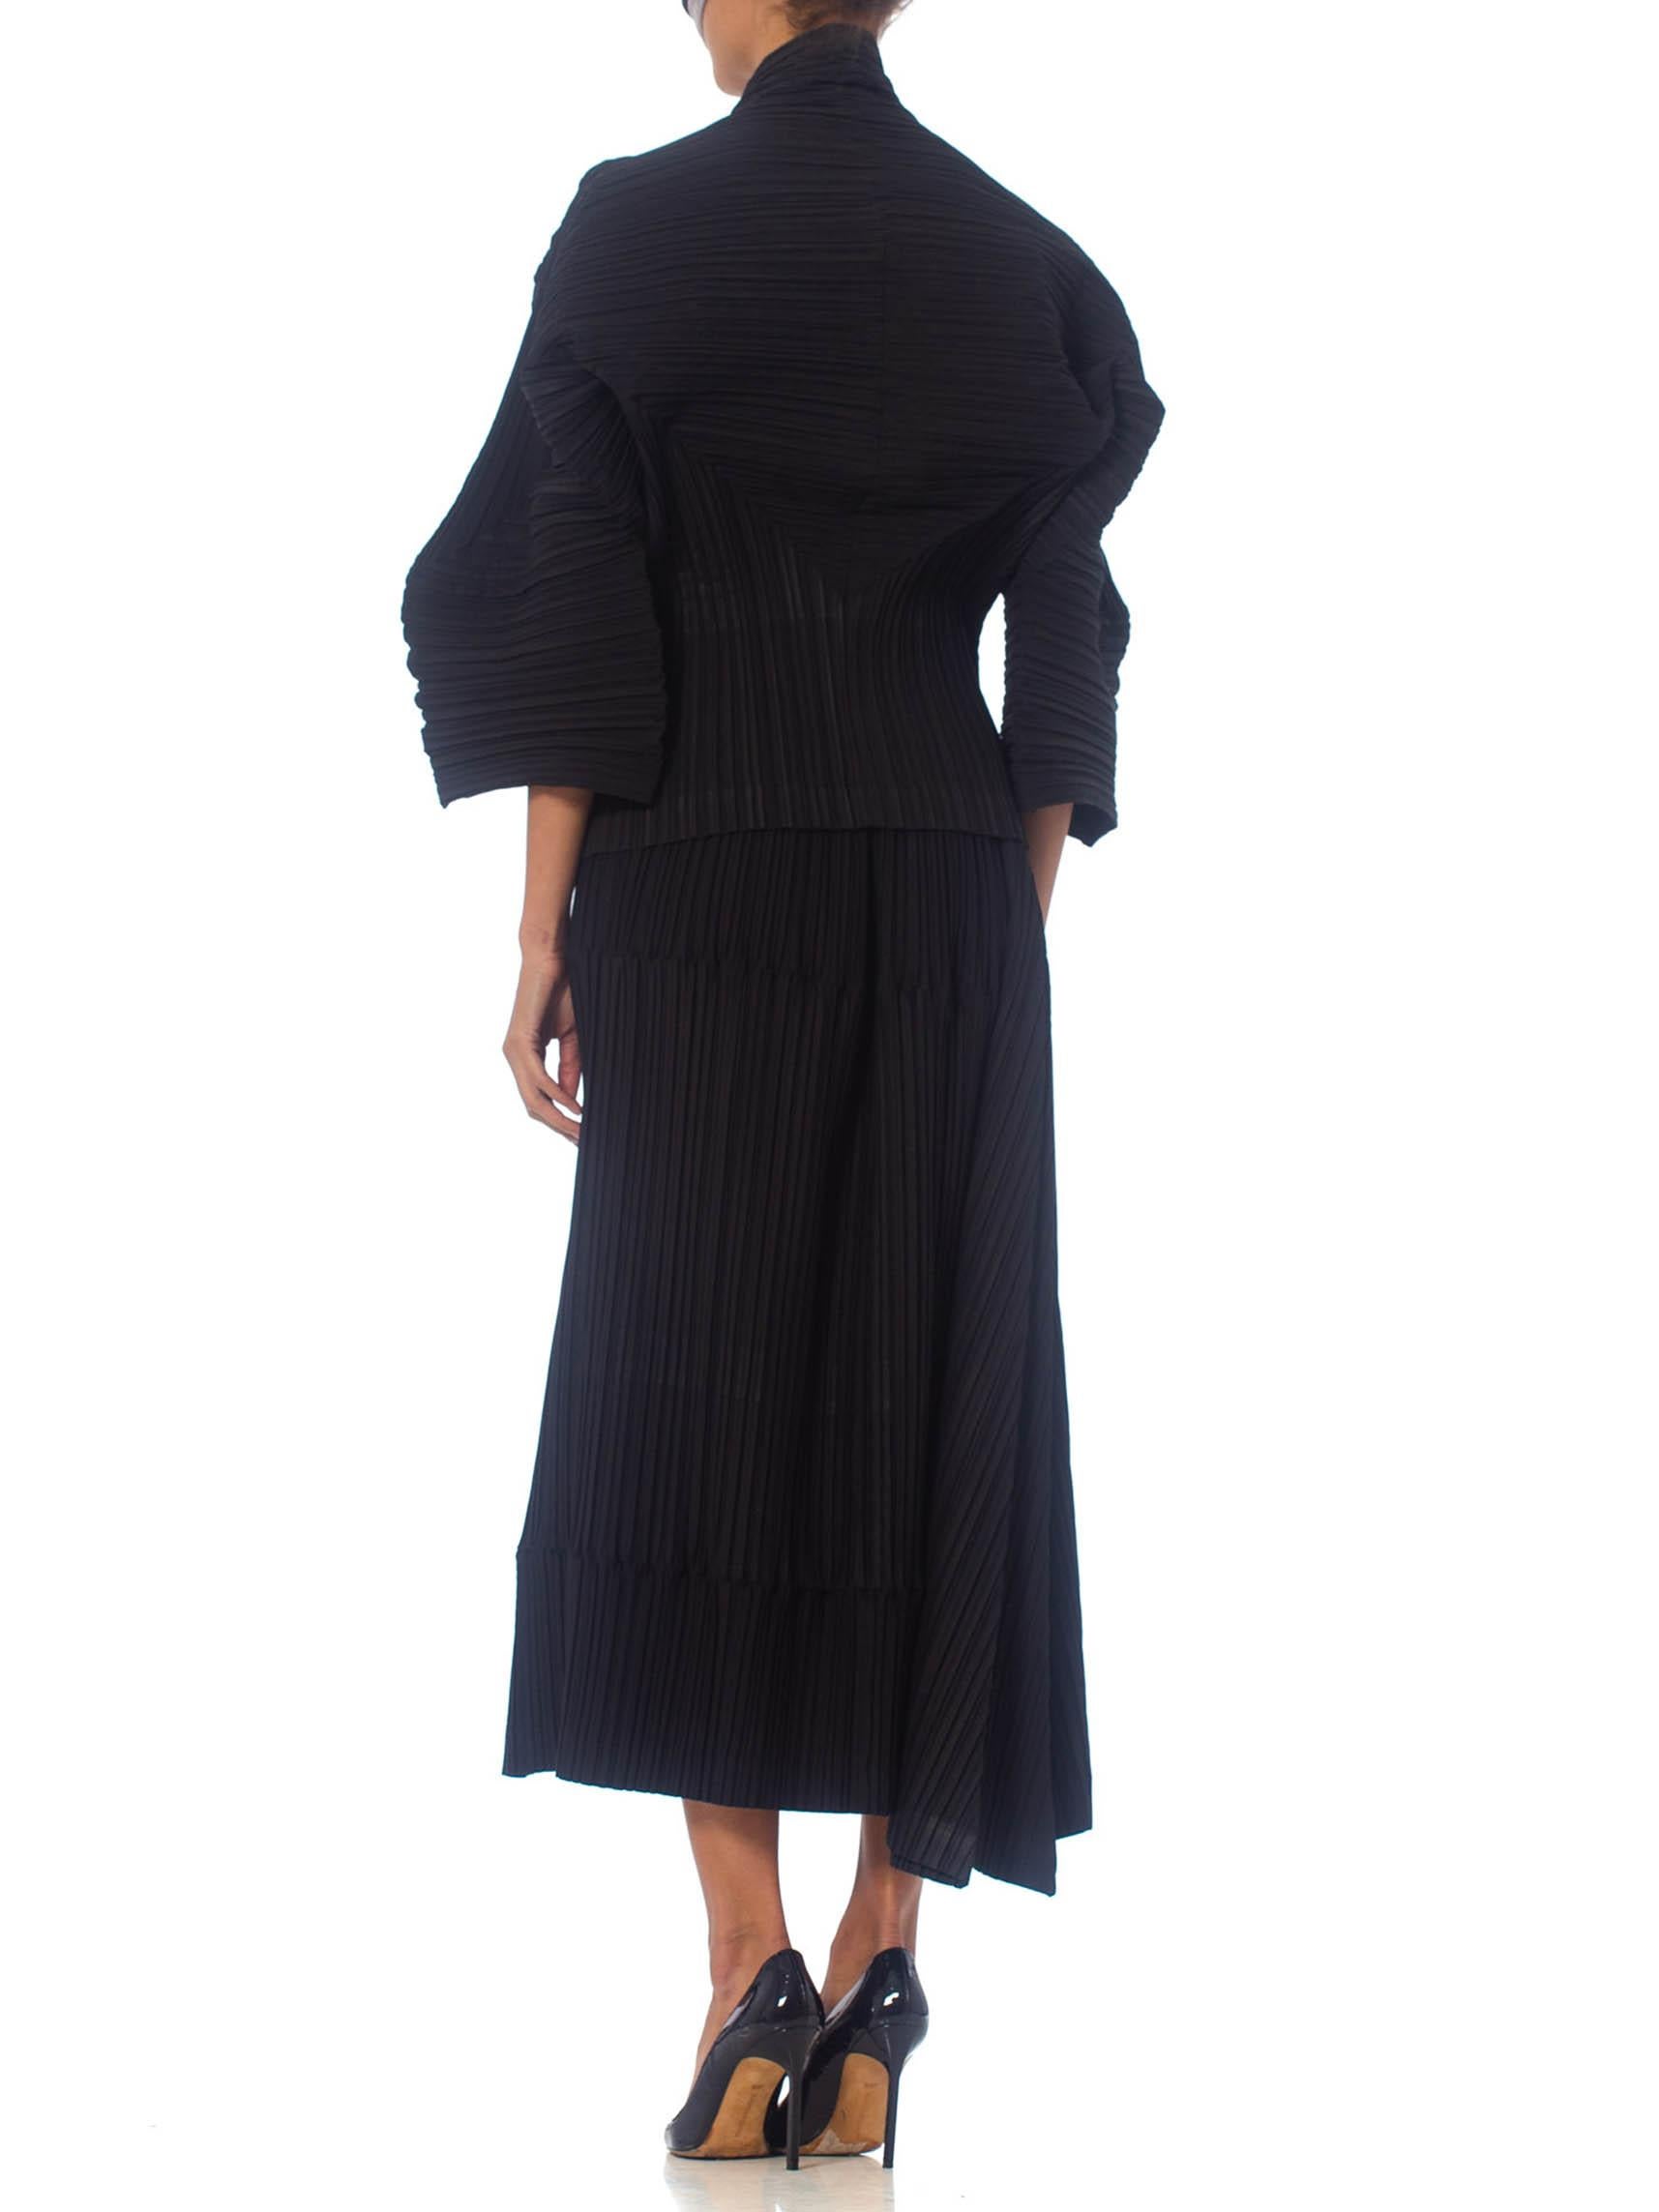 1990S ISSEY MIYAKE Black Pleated Poly Blend Jacket & Skirt Ensemble For Sale 5